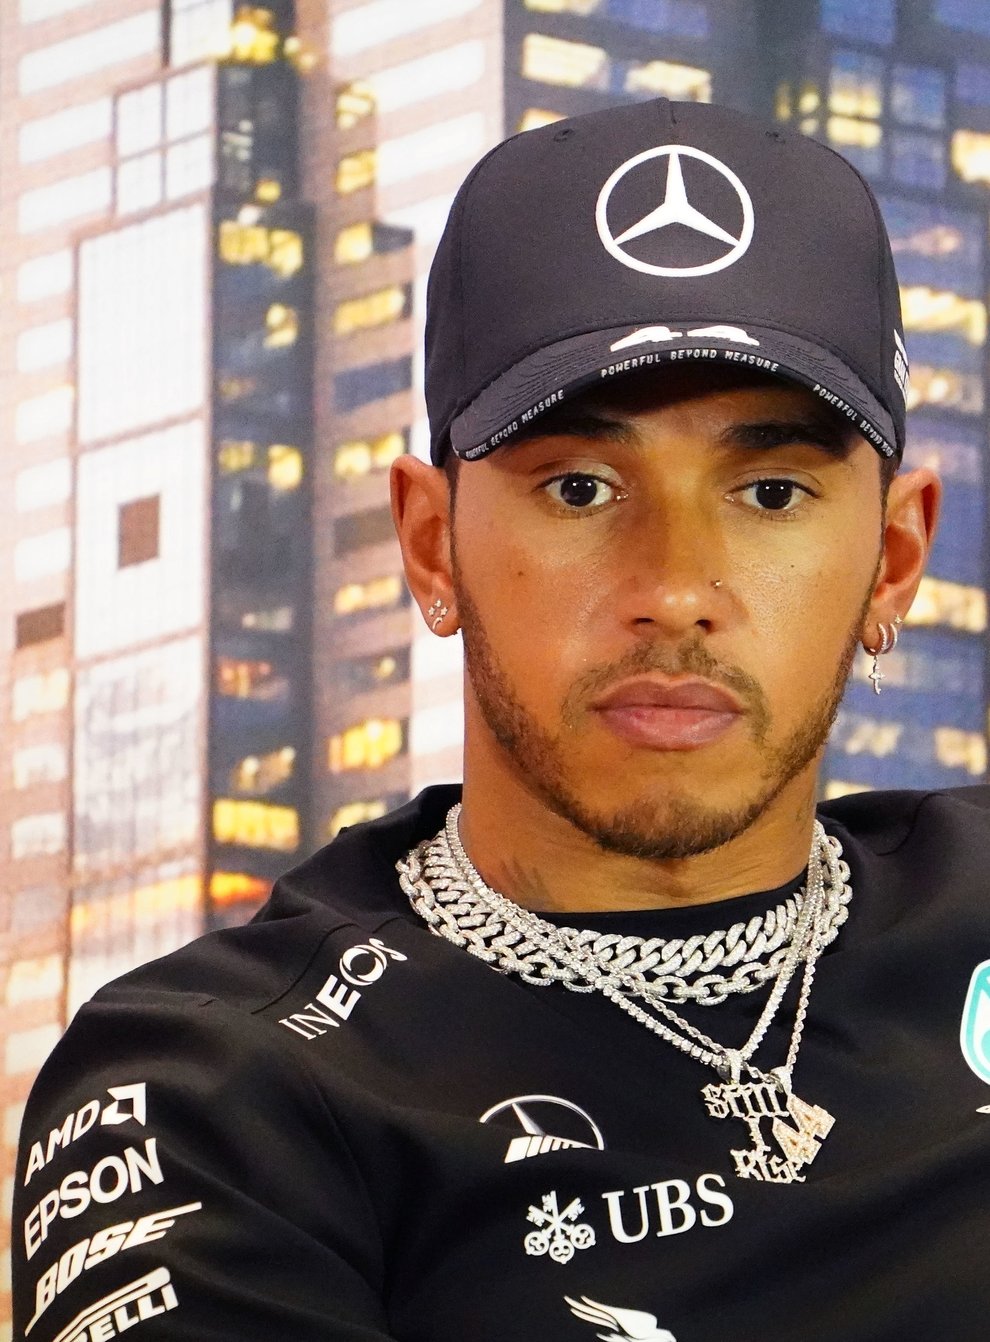 Hamilton is one GP win away from equalling Michael Schumacher’s record of 91